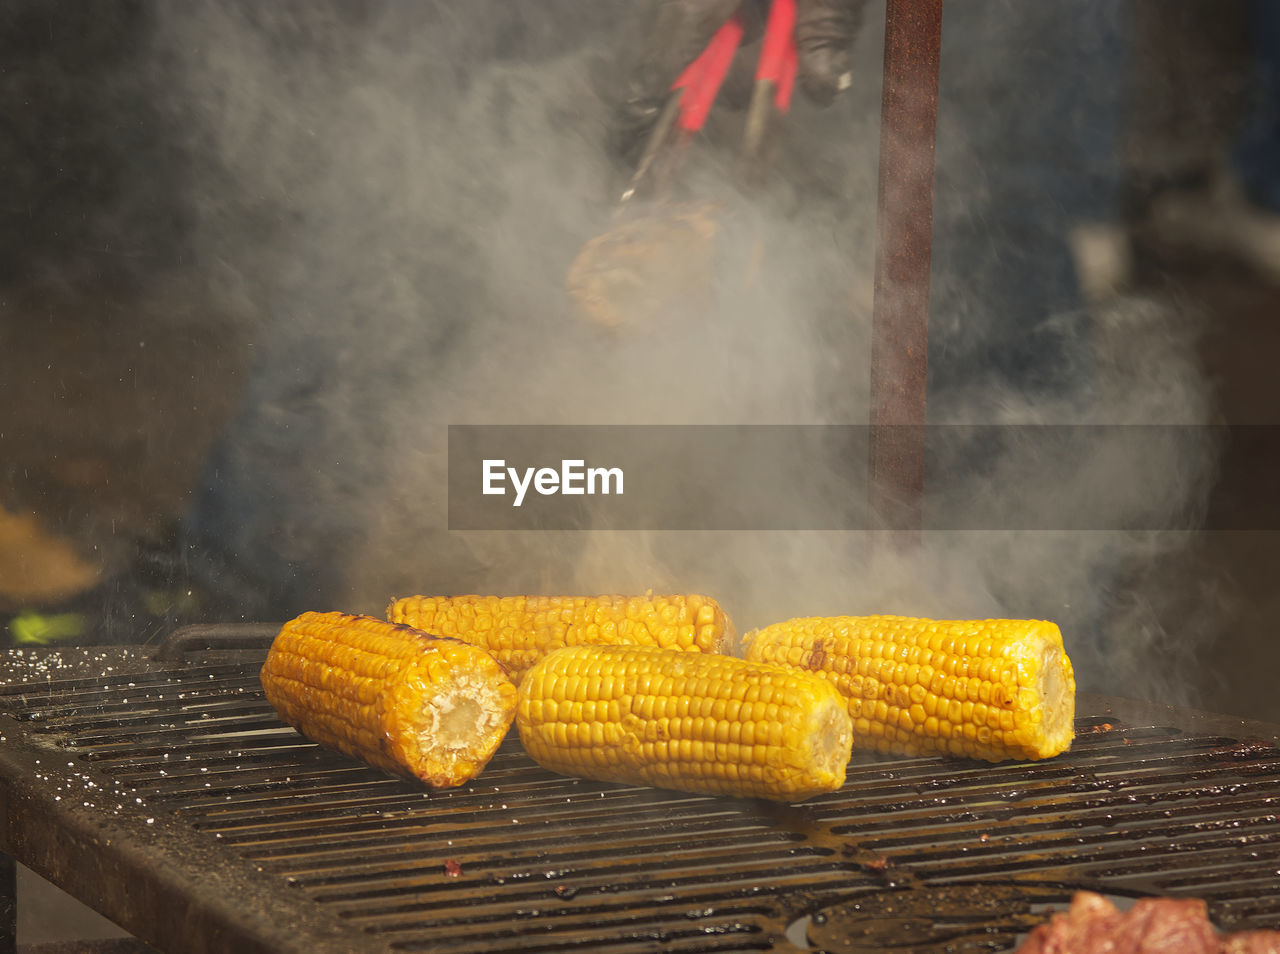 CLOSE-UP OF FOOD ON GRILL